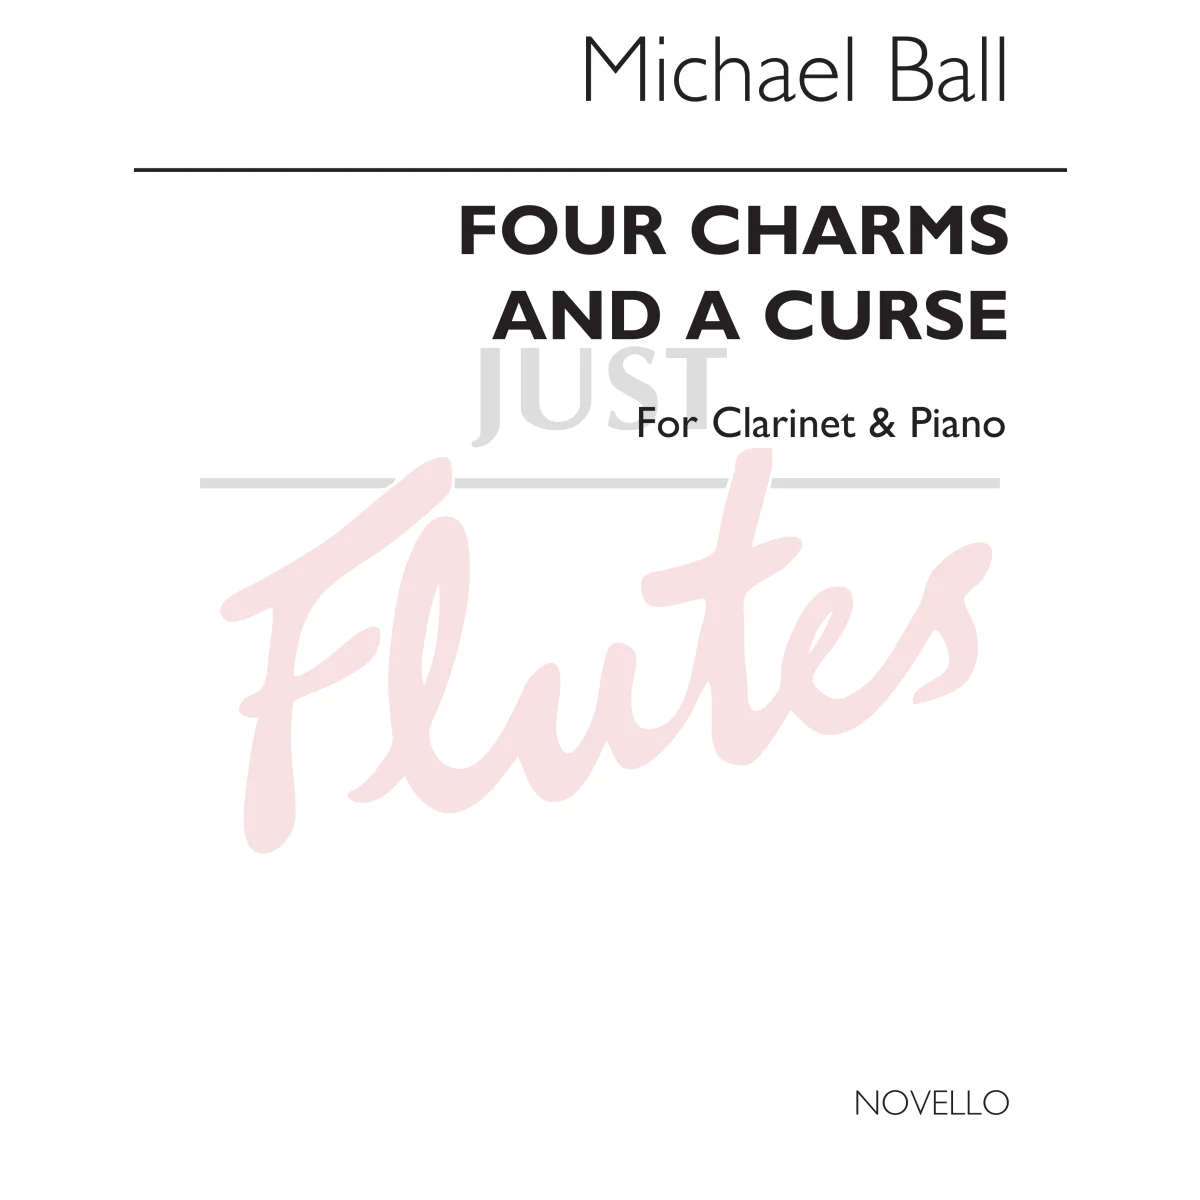 Four Charms and a Curse for Clarinet and Piano